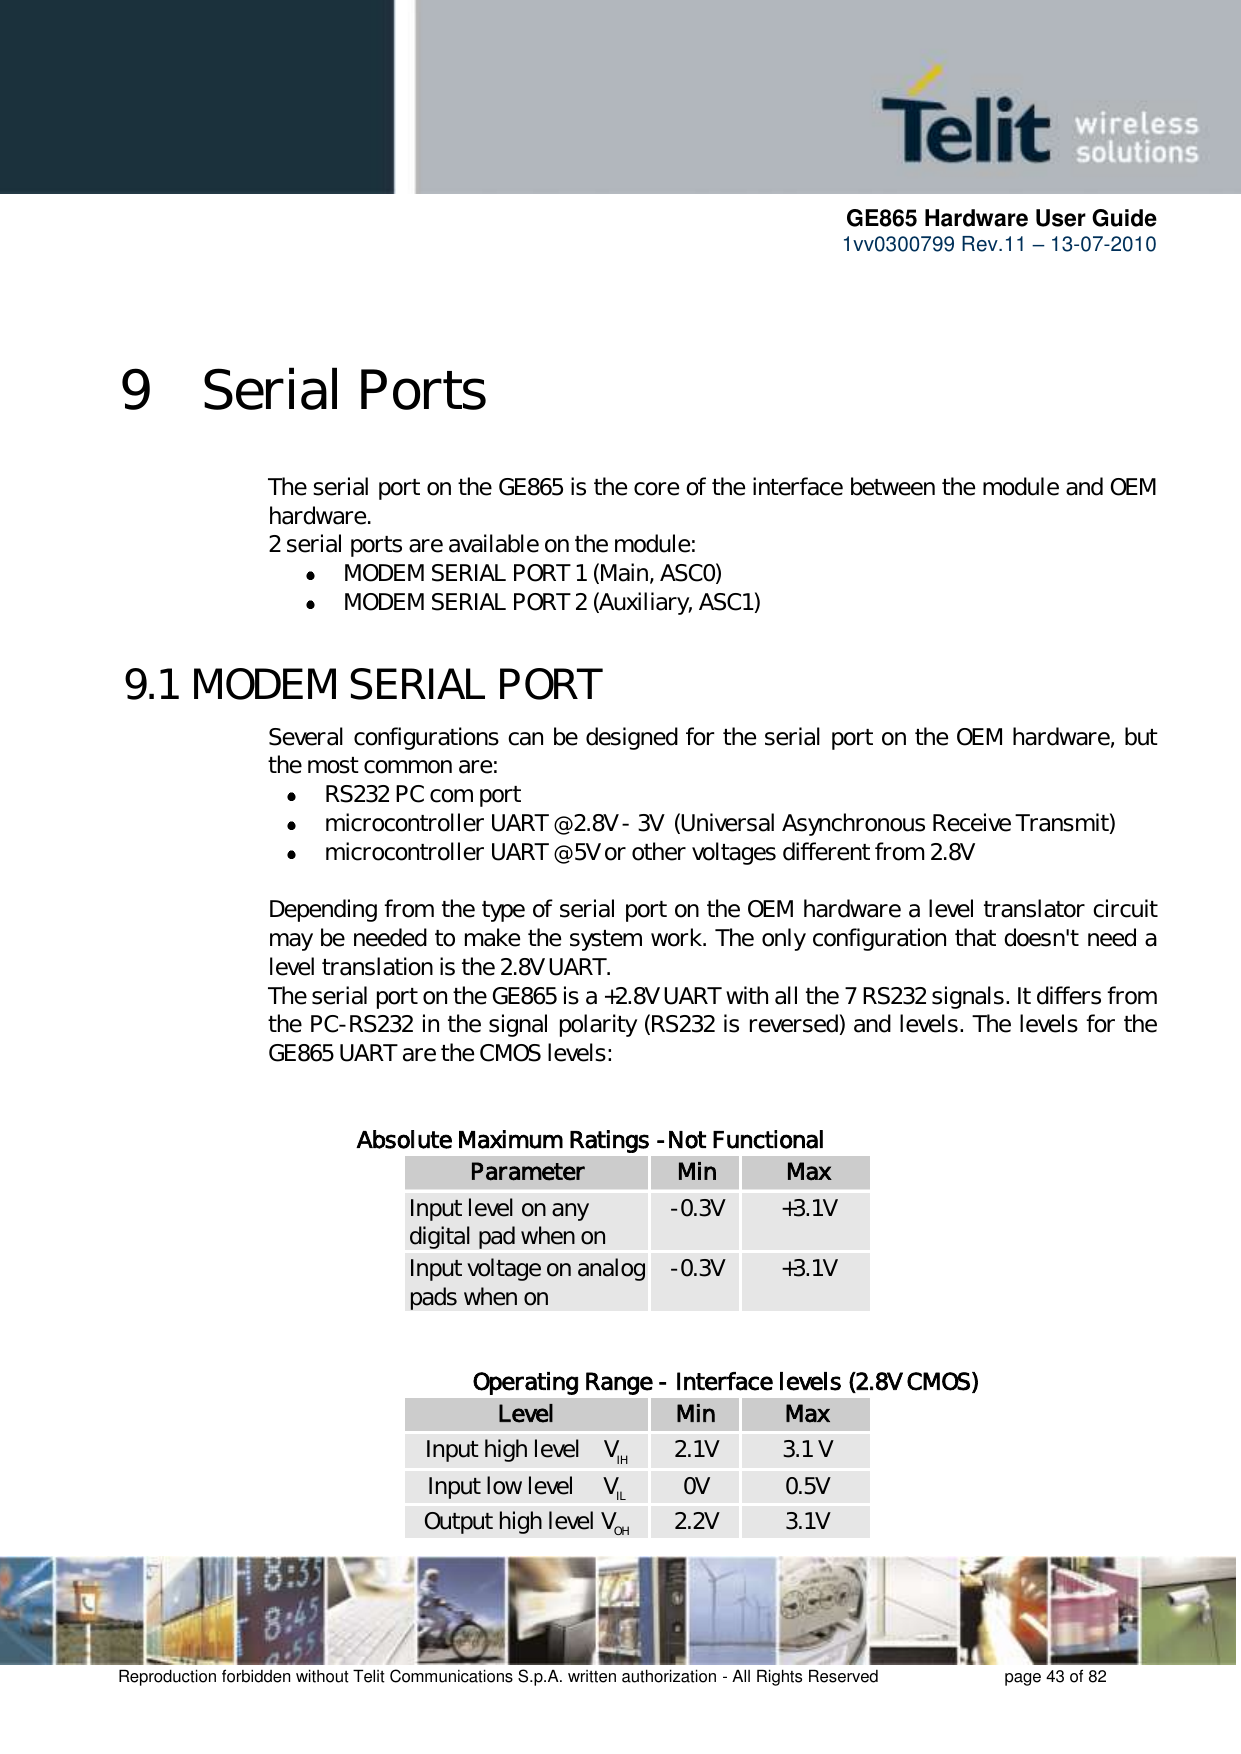      GE865 Hardware User Guide 1vv0300799 Rev.11 – 13-07-2010       Reproduction forbidden without Telit Communications S.p.A. written authorization - All Rights Reserved    page 43 of 82    9 Serial Ports The serial port on the GE865 is the core of the interface between the module and OEM hardware.  2 serial ports are available on the module:  MODEM SERIAL PORT 1 (Main, ASC0)  MODEM SERIAL PORT 2 (Auxiliary, ASC1)  9.1 MODEM SERIAL PORT  Several configurations can be designed for the serial port on the OEM hardware, but the most common are:  RS232 PC com port  microcontroller UART @ 2.8V - 3V  (Universal Asynchronous Receive Transmit)   microcontroller UART @ 5V or other voltages different from 2.8V   Depending from the type of serial port on the OEM hardware a level translator circuit may be needed to make the system work. The only configuration that doesn&apos;t need a level translation is the 2.8V UART. The serial port on the GE865 is a +2.8V UART with all the 7 RS232 signals. It differs from the PC-RS232 in the signal polarity (RS232 is reversed) and levels. The levels for the GE865 UART are the CMOS levels:   Absolute Maximum Ratings -Not Functional Parameter Min Max Input level on any digital pad when on -0.3V +3.1V Input voltage on analog pads when on -0.3V +3.1V         Operating Range - Interface levels (2.8V CMOS) Level Min Max Input high level    VIH 2.1V 3.1 V Input low level     VIL 0V 0.5V Output high level VOH 2.2V 3.1V 